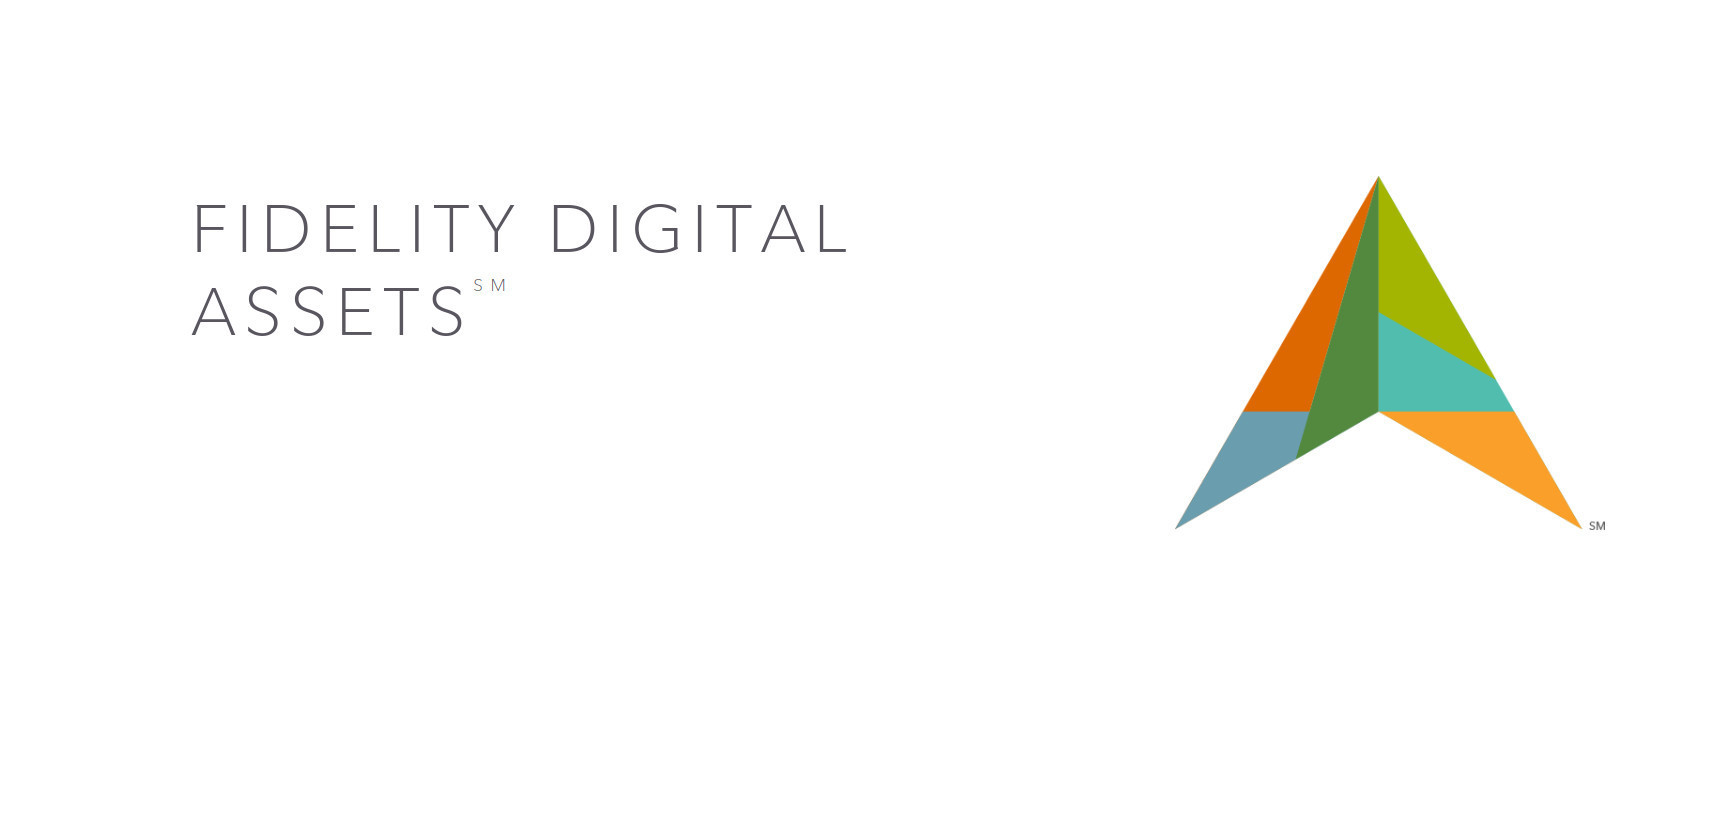 Fidelity Digital Assets is building enterprise-grade bitcoin custody and other services for large institutions.